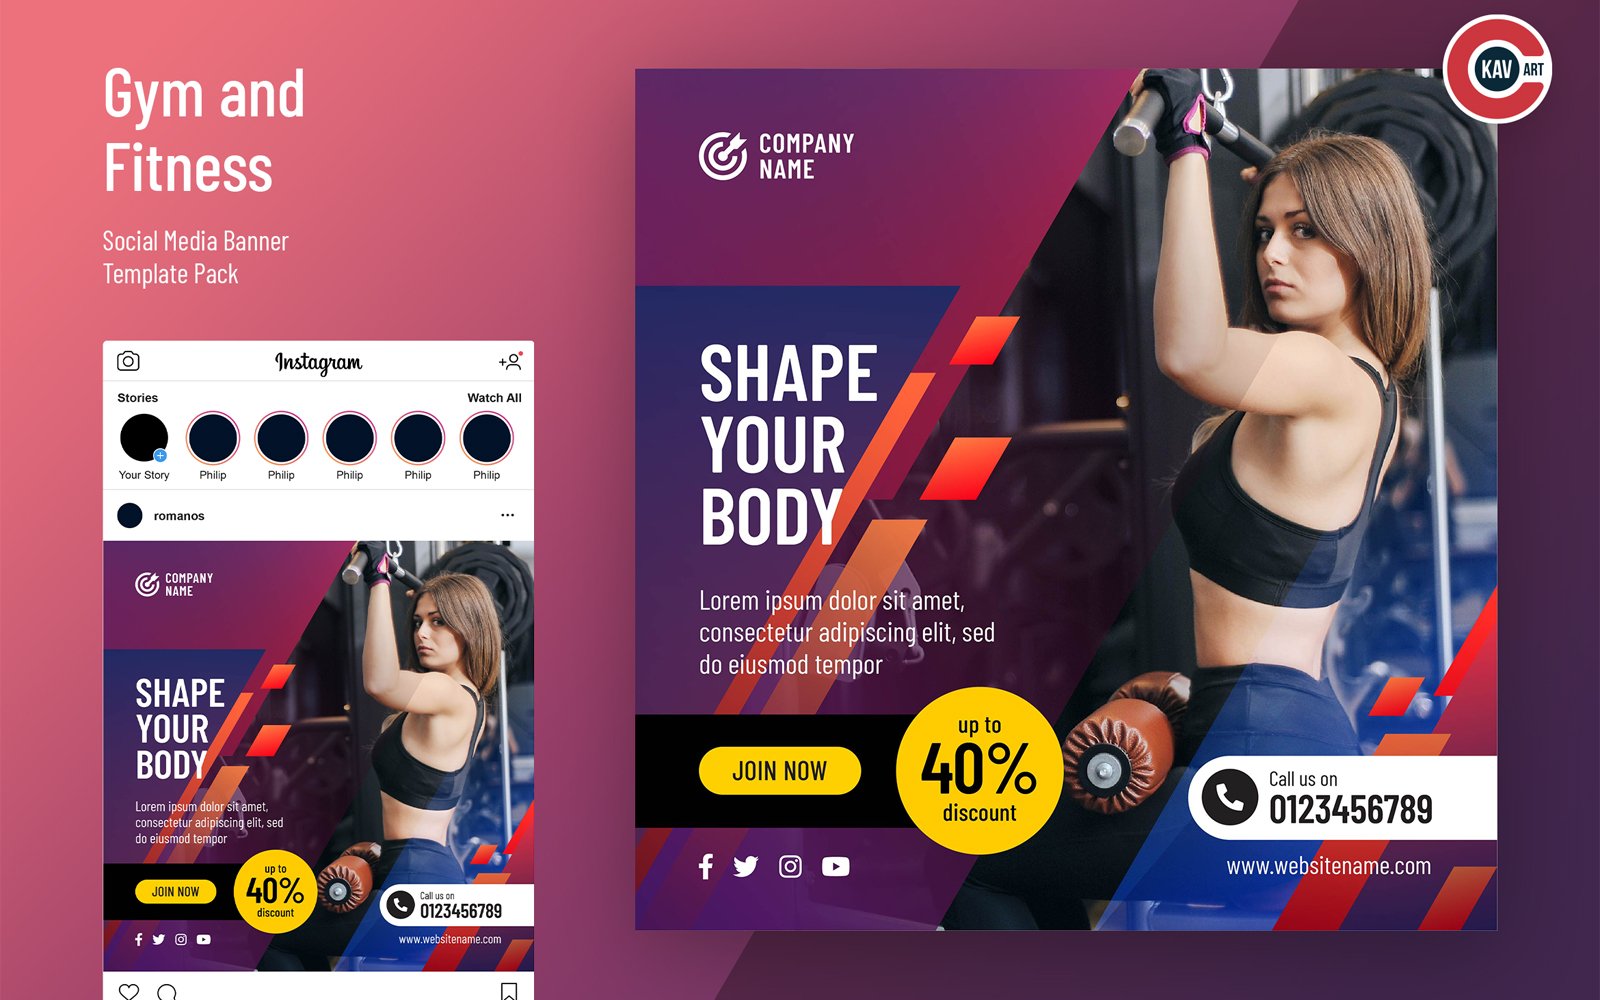 Social Media Banner for Gym and Fitness